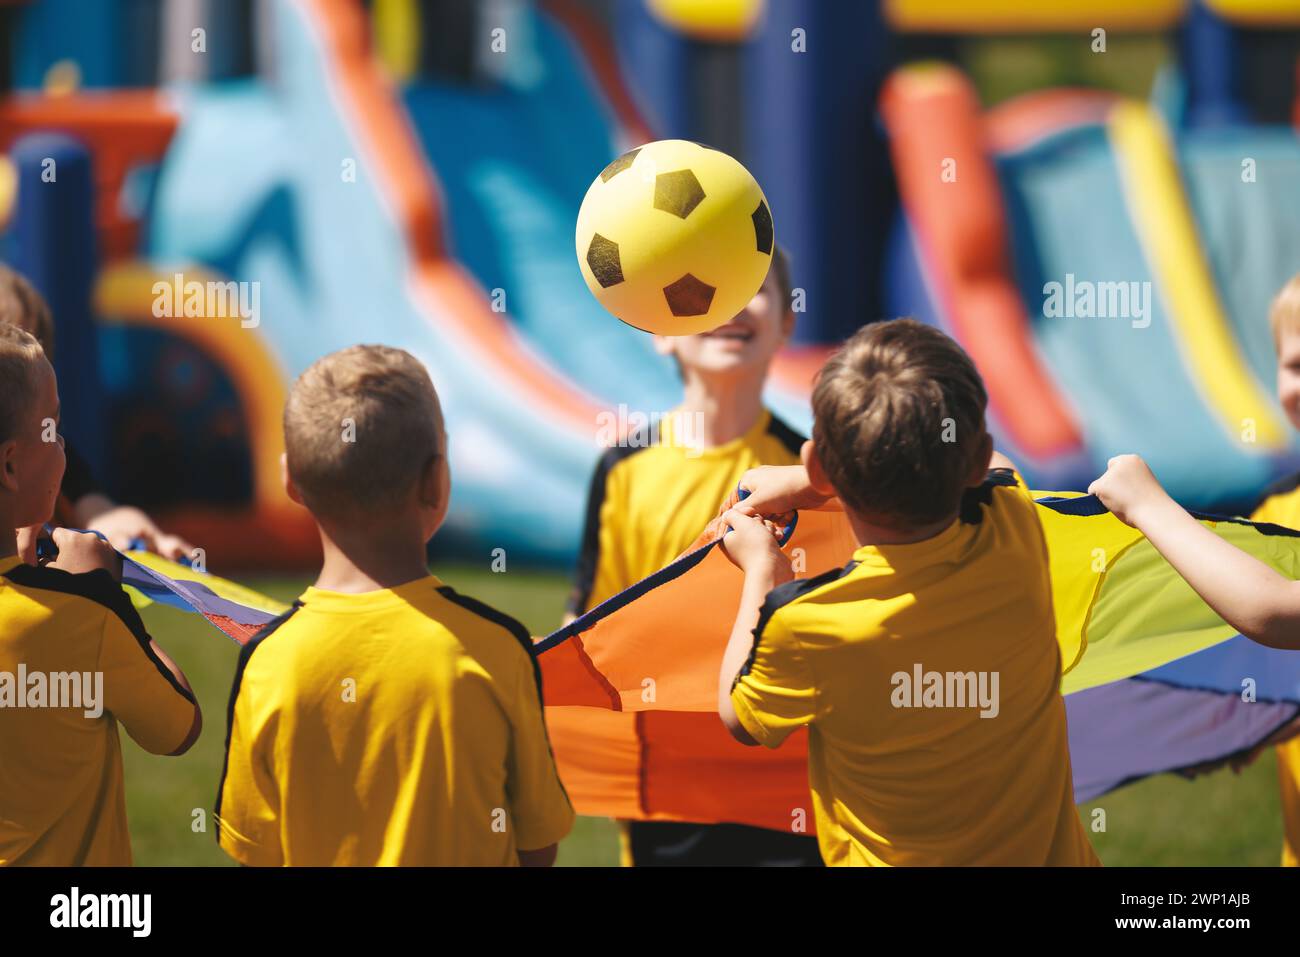 Happy kids playing at festival. School boys having fun and bouncing soccer ball together. Colourful toys for children Stock Photo